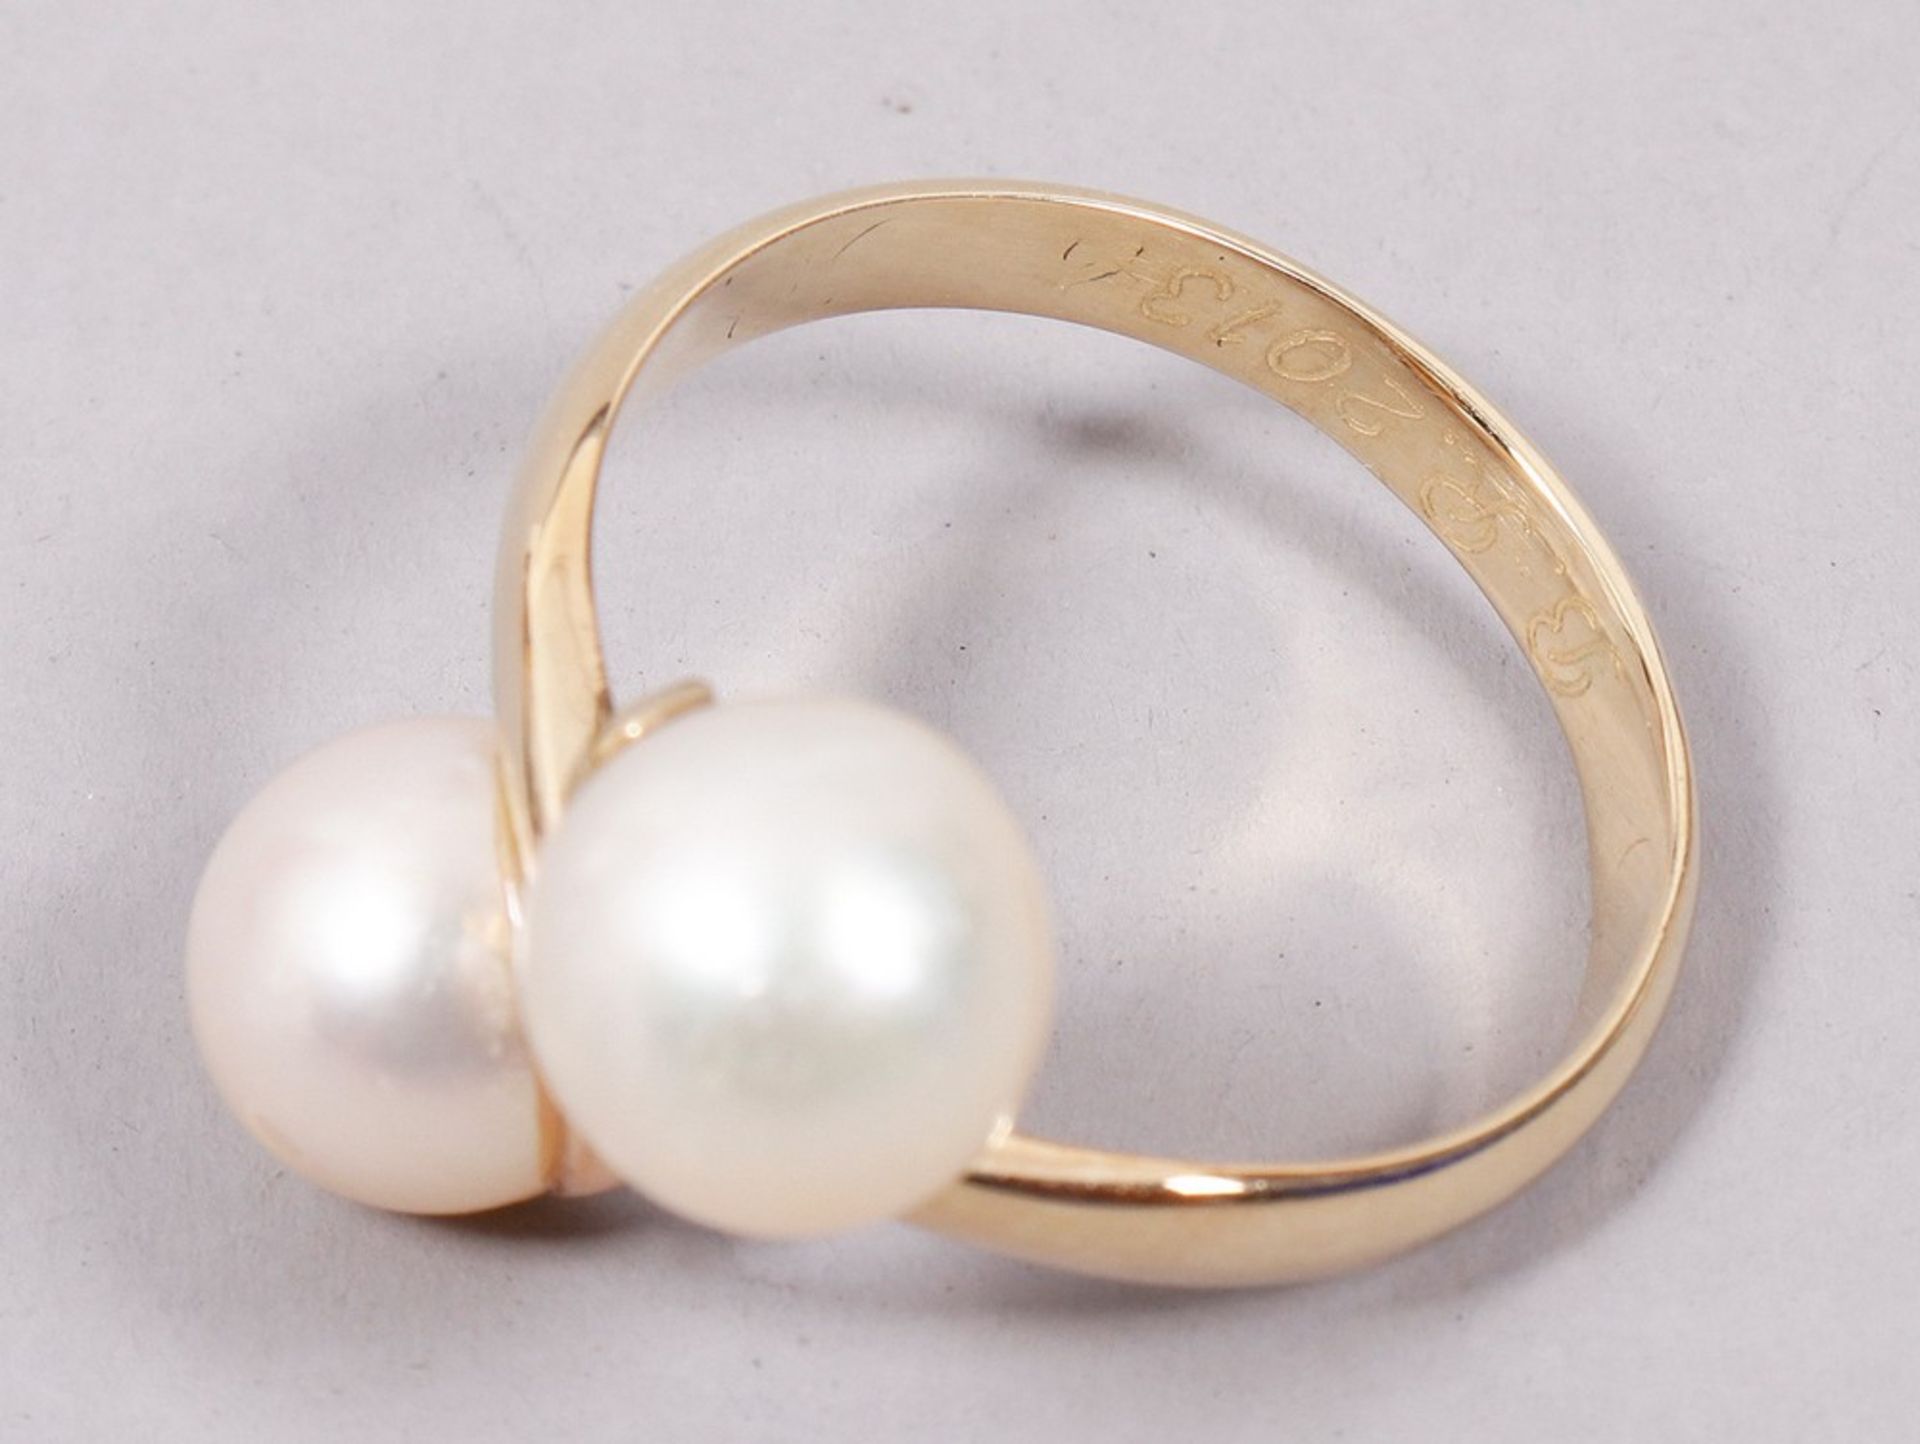 Pearl ring, 585 yellow gold, 20th C. - Image 3 of 4